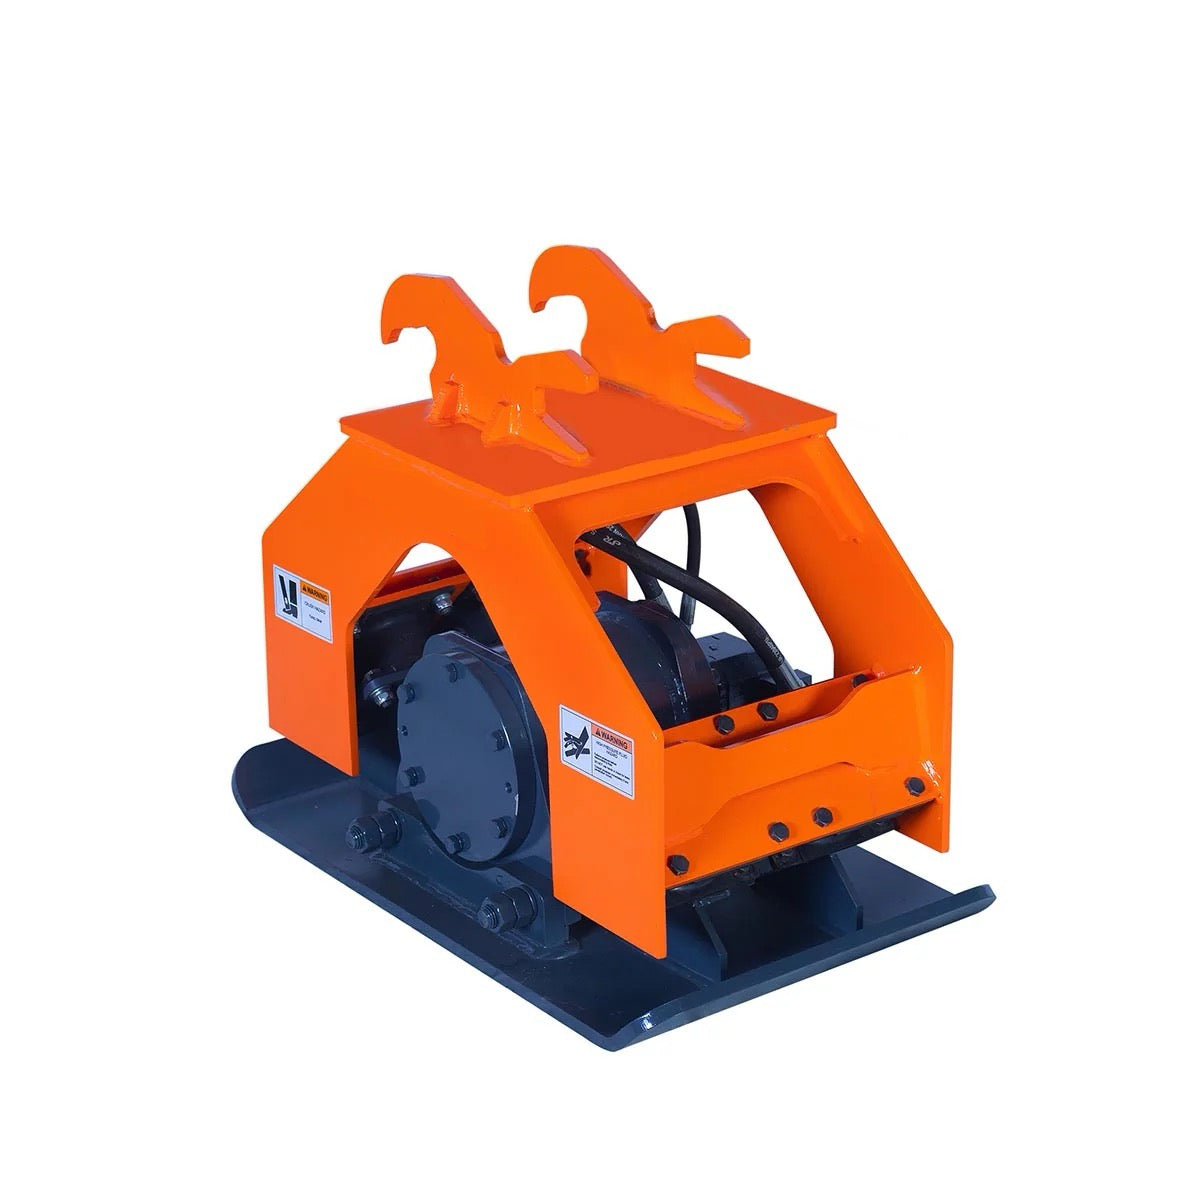 New Premium 8,800-lb Hydraulic Plate Compactor, 2-4 Ton Excavator Weight, 19” Compact Capacity